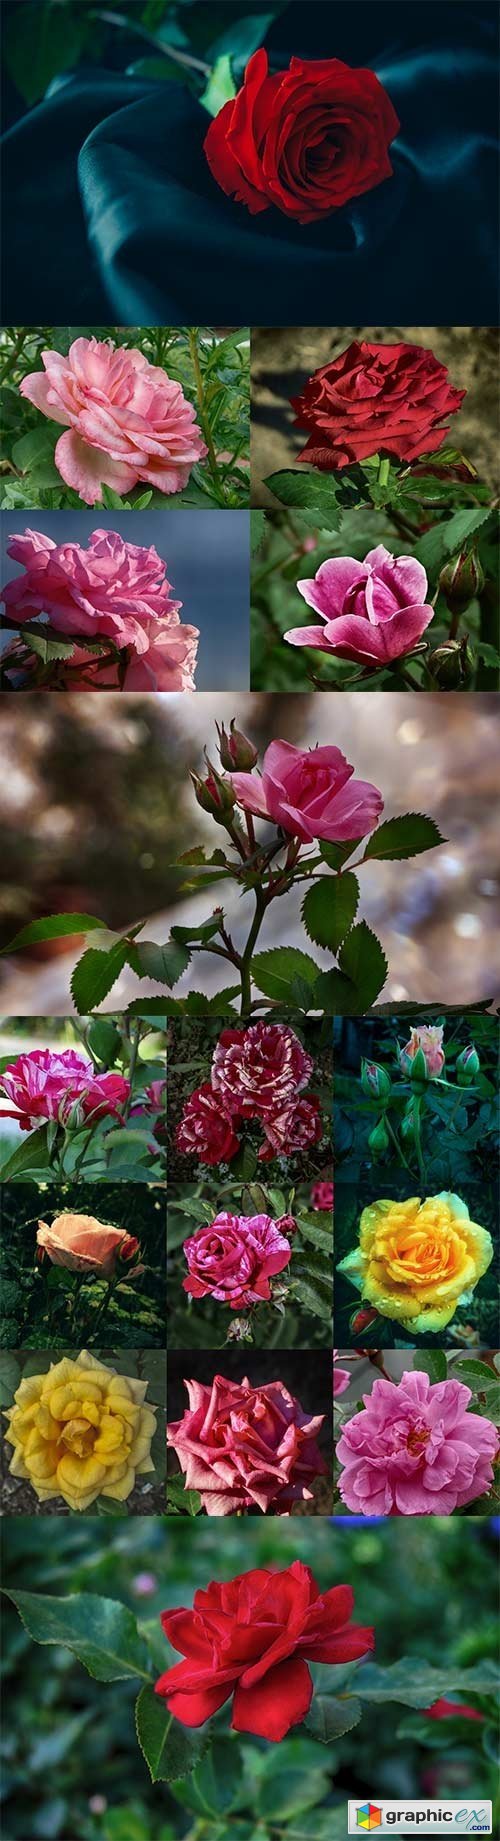 Charming roses